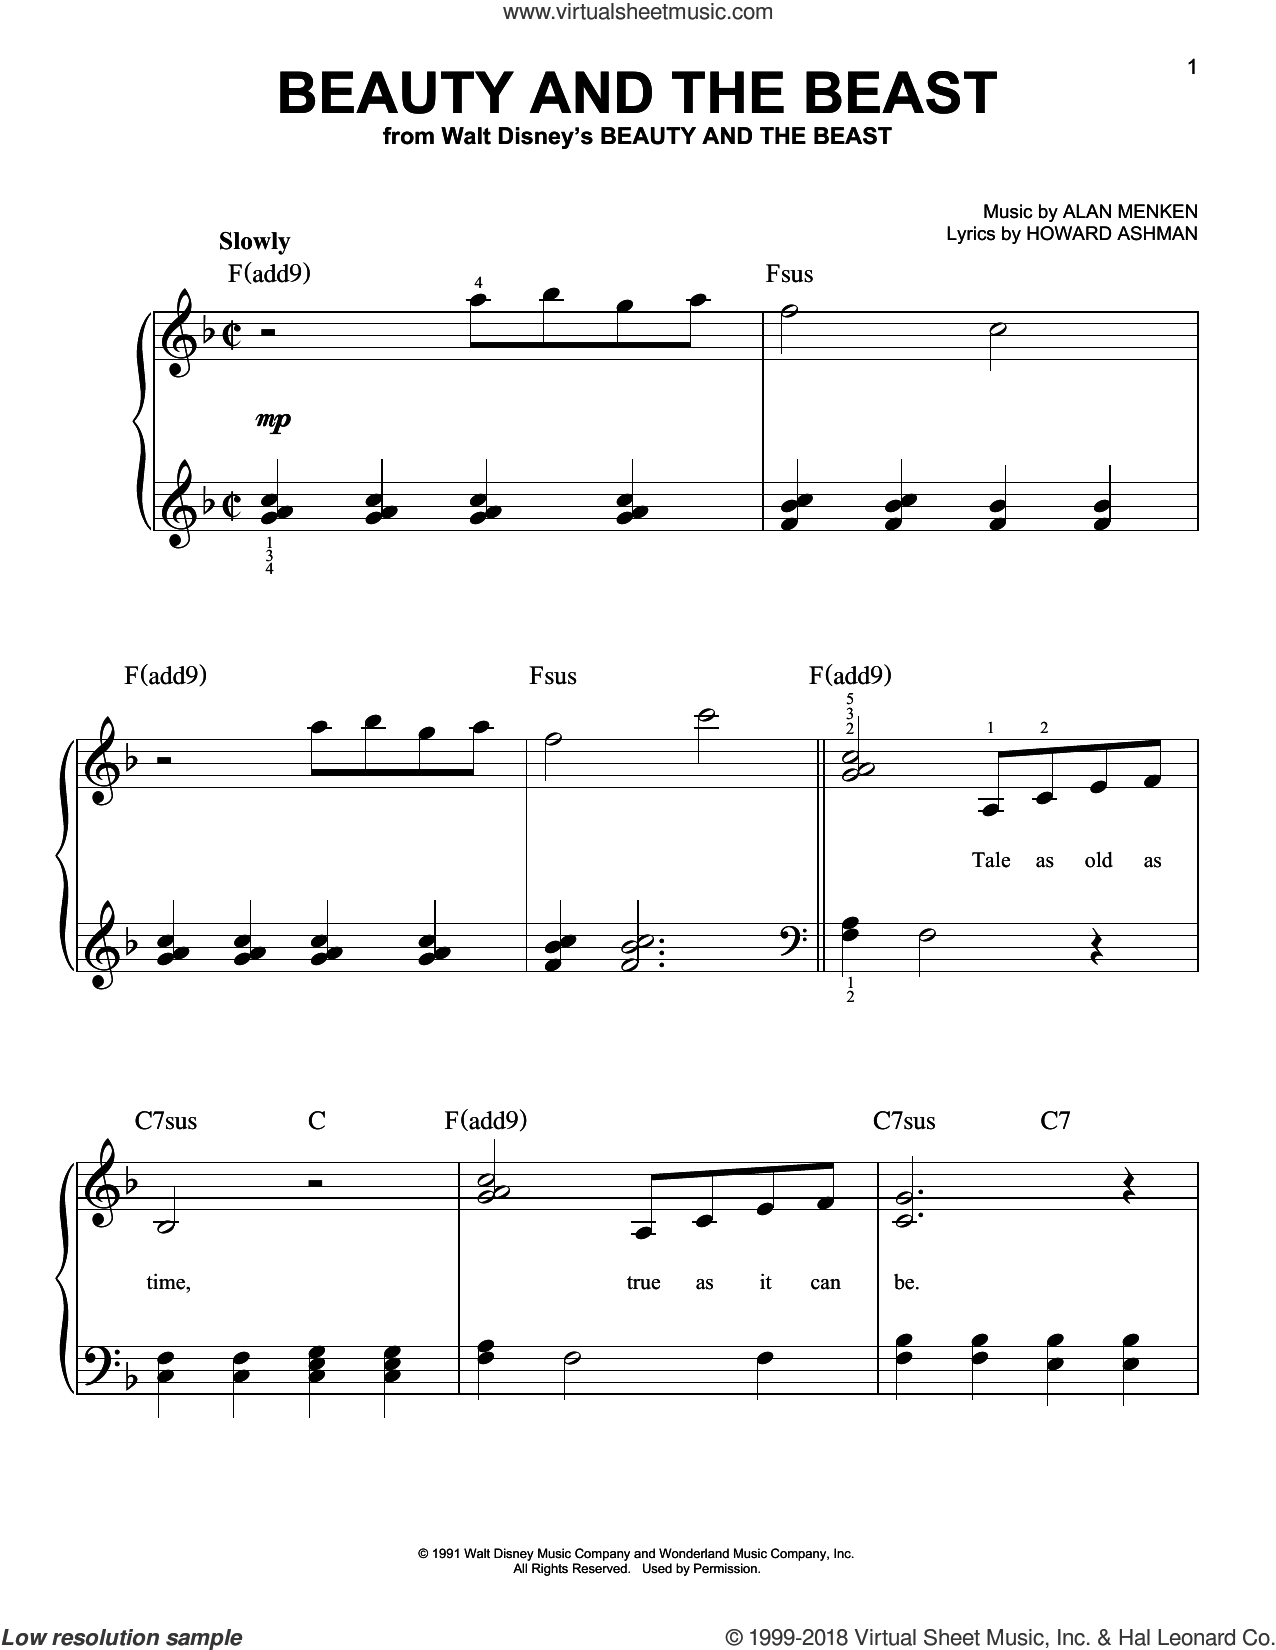 Lansbury - Beauty And The Beast Sheet Music For Piano Solo [Pdf] - Beauty And The Beast Piano Sheet Music Free Printable